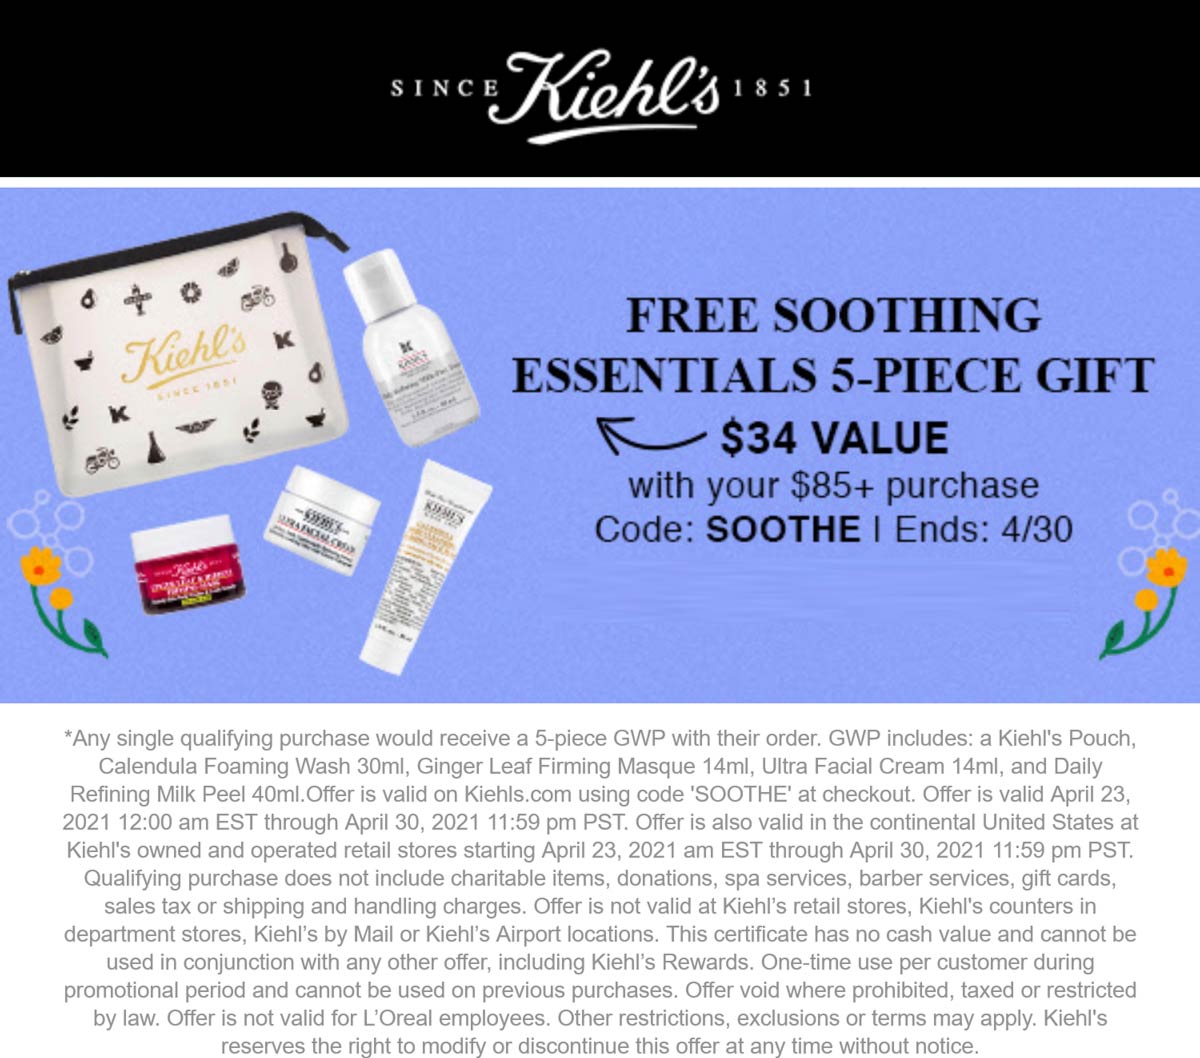 Kiehls stores Coupon  5pc $34 set free with $85 spent at Kiehls via promo code SOOTHE #kiehls 